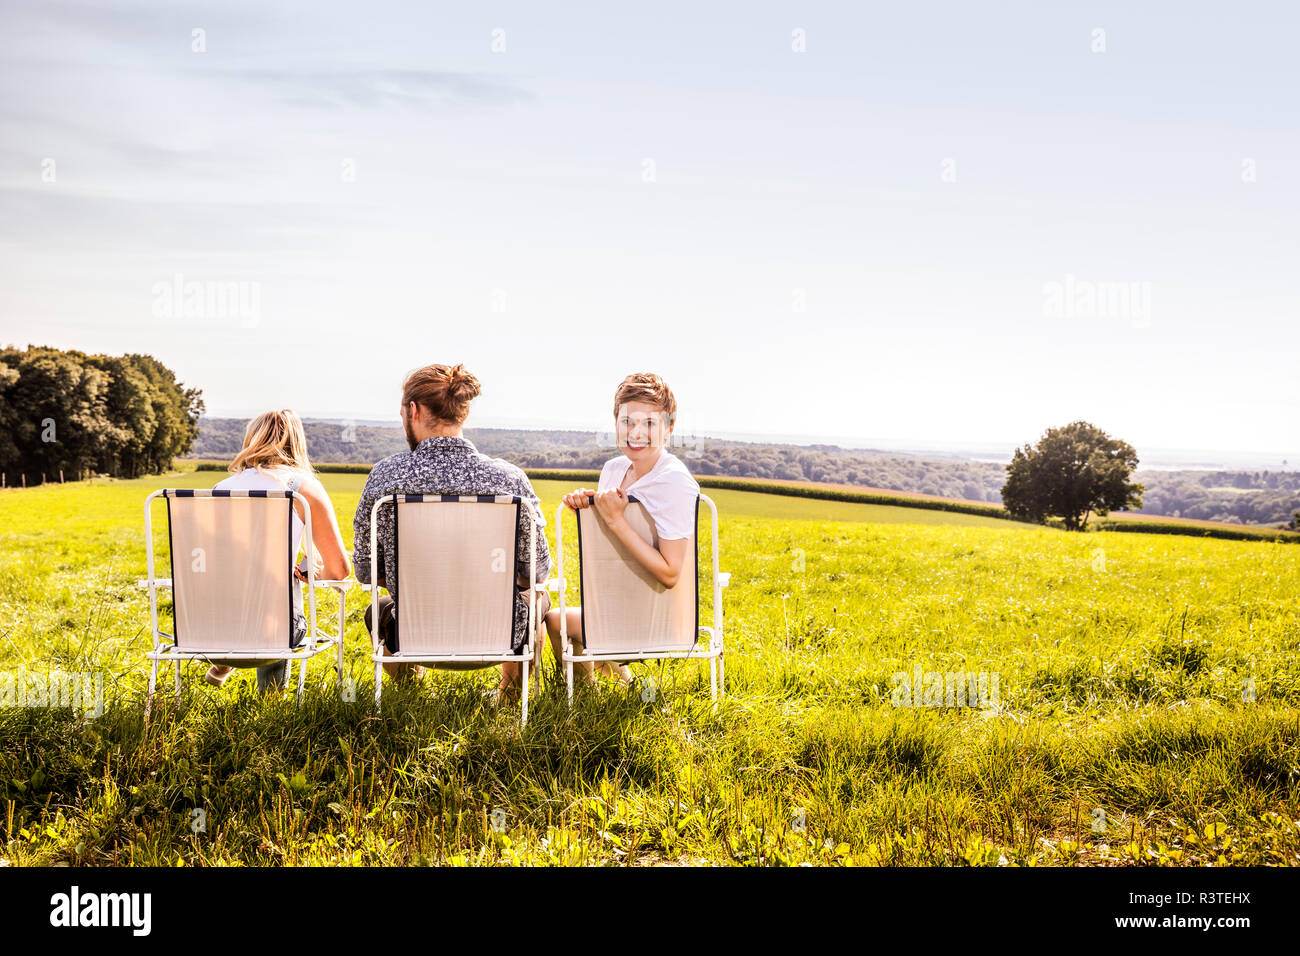 Friends sitting on camping chairs in rural landscape Stock Photo